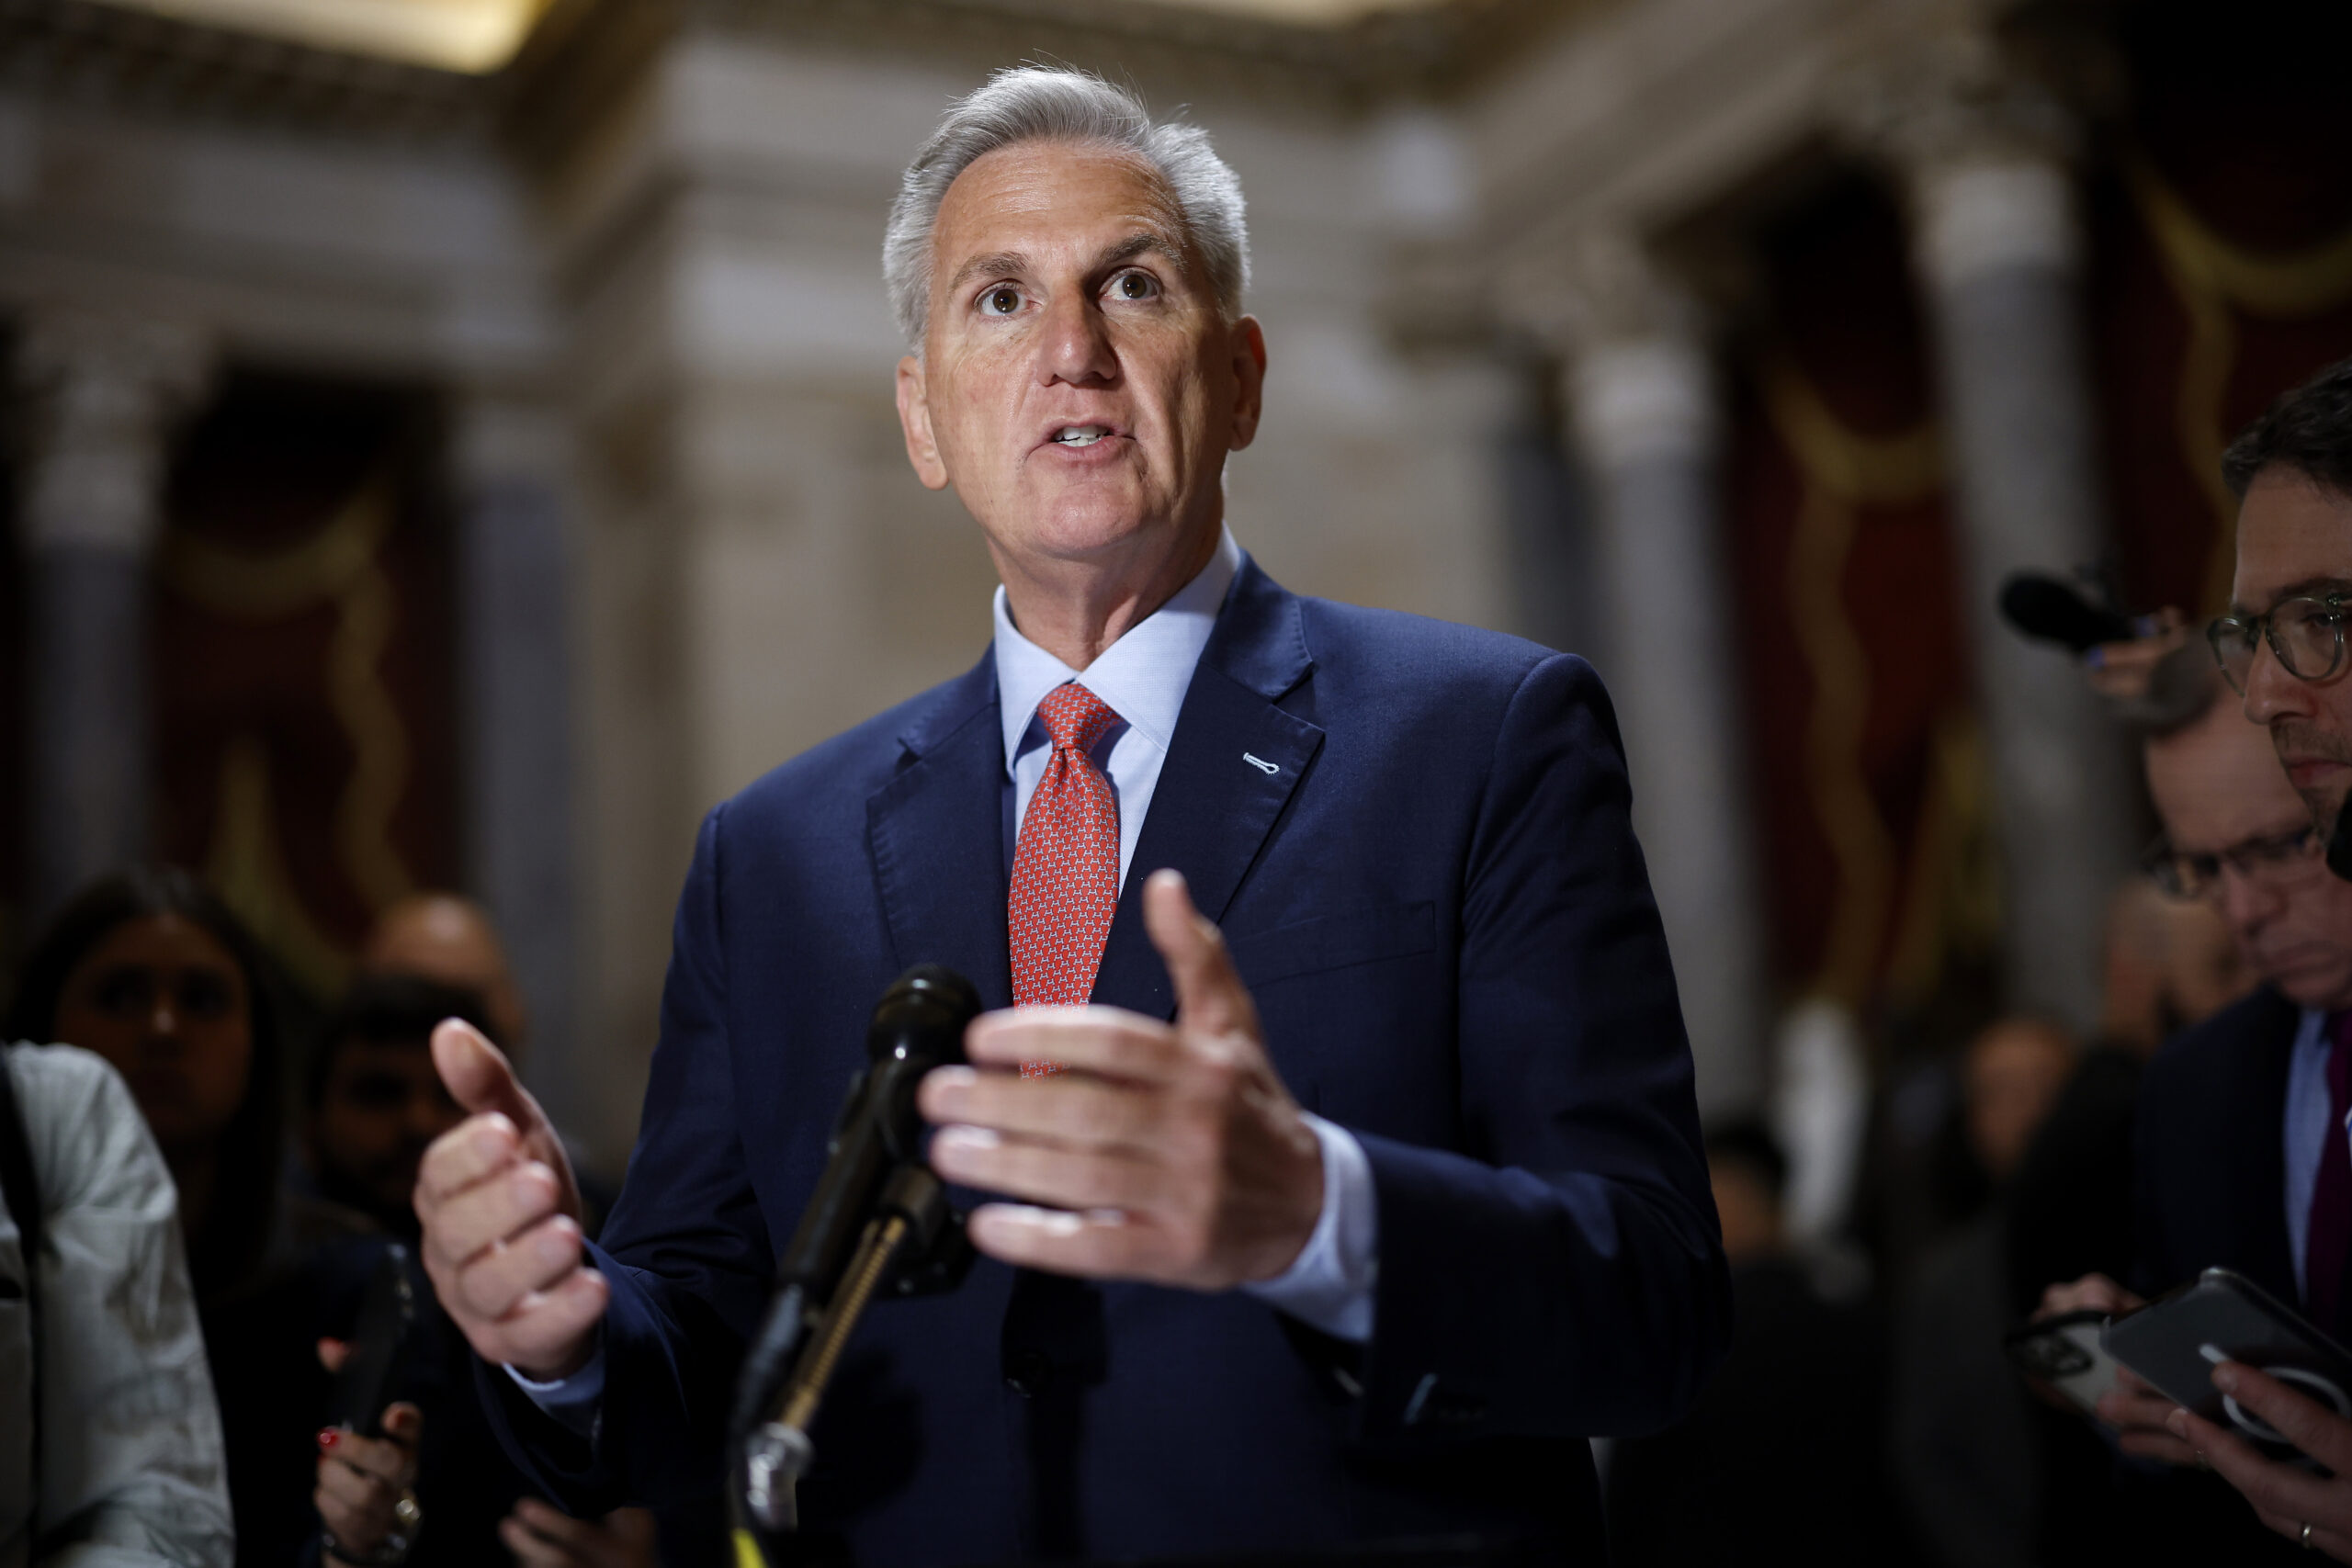 Kevin McCarthy defends debt ceiling deal, aims to change Washington’s operations.